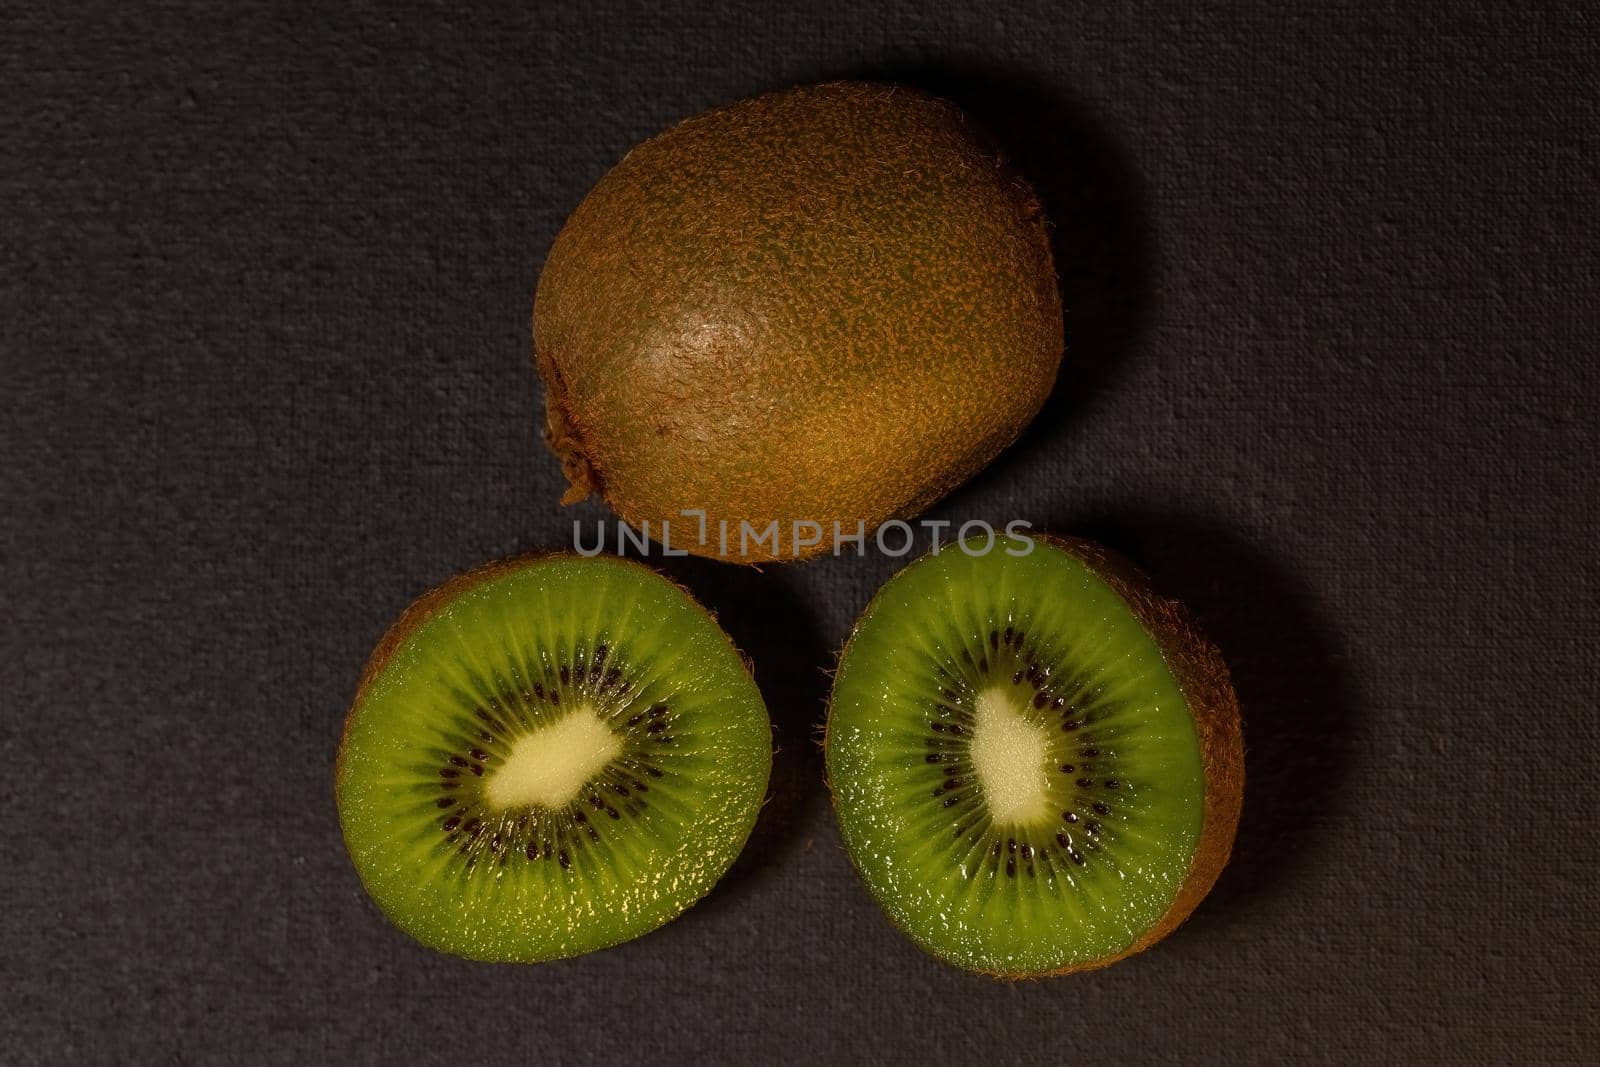 Kiwi fruits on black background. Whole kiwi and cut in half. Top view with copy space, flat lay.